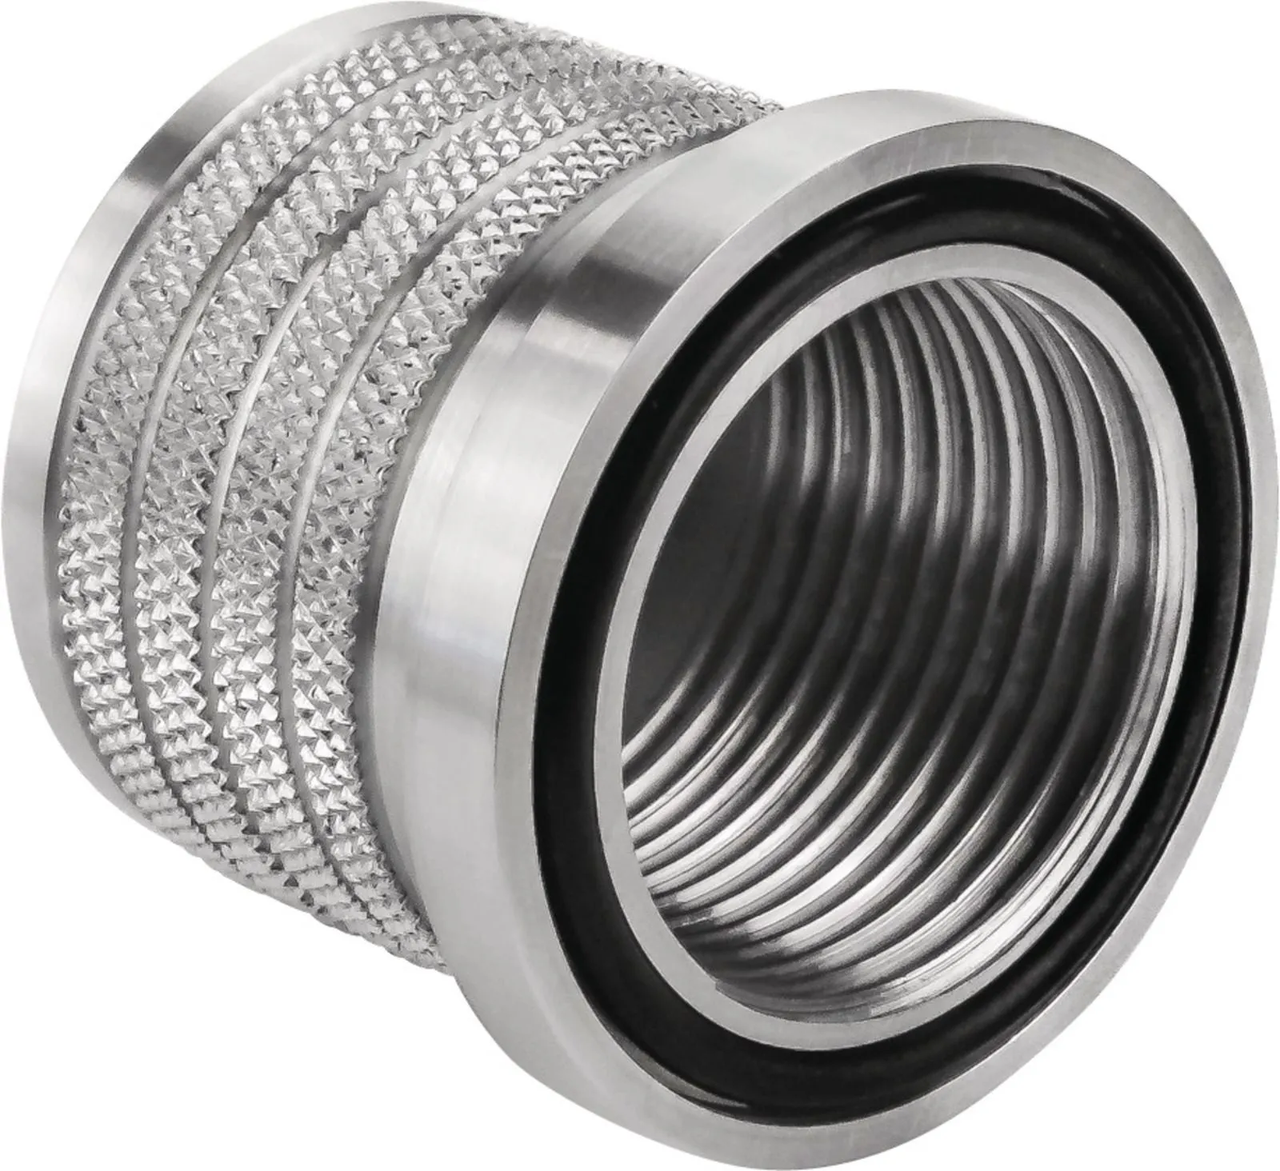 Aluminium Timing Chain Tensioner Cap 'Knurled', noble design, reliable grip thanks to knurled surface, durable service life